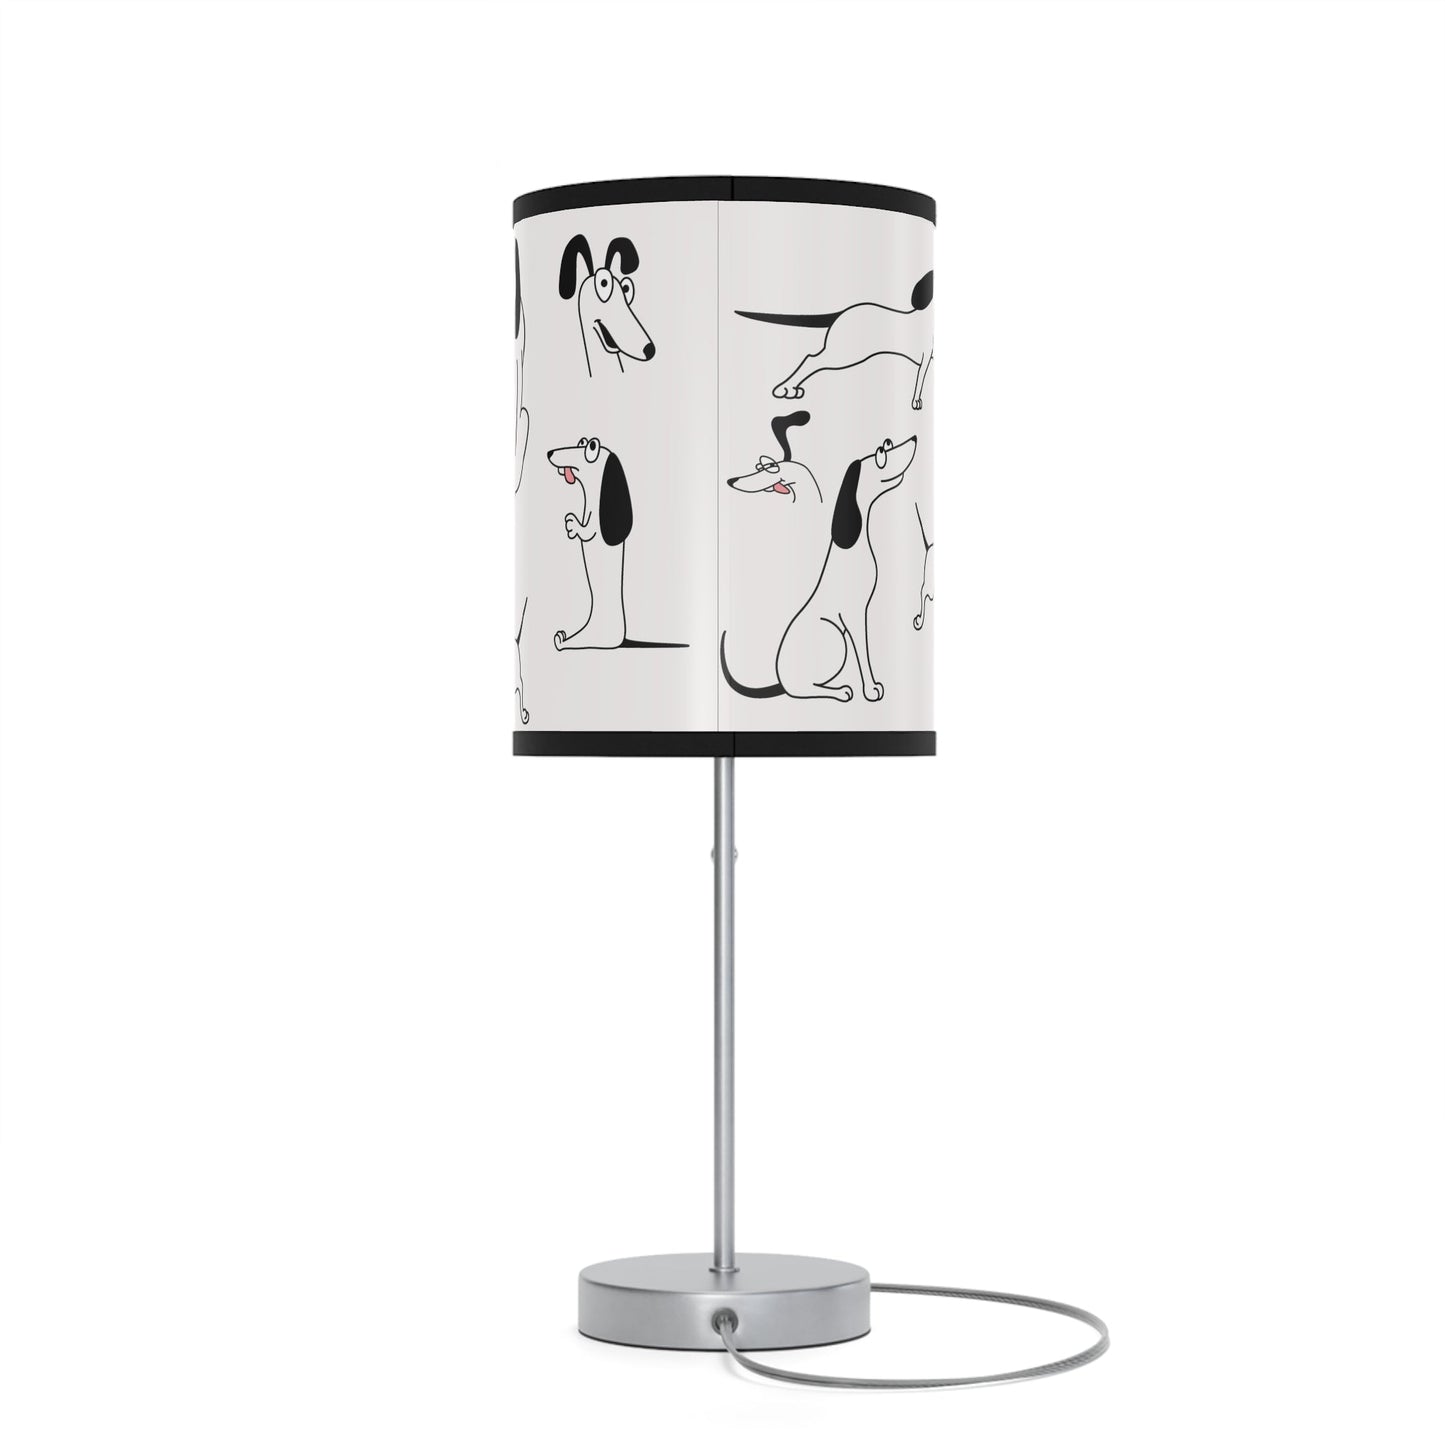 Playful Dog Lamp, Black and White Line Drawings of Dogs Accent Desk Lamp, Lamp Art - FlooredByArt